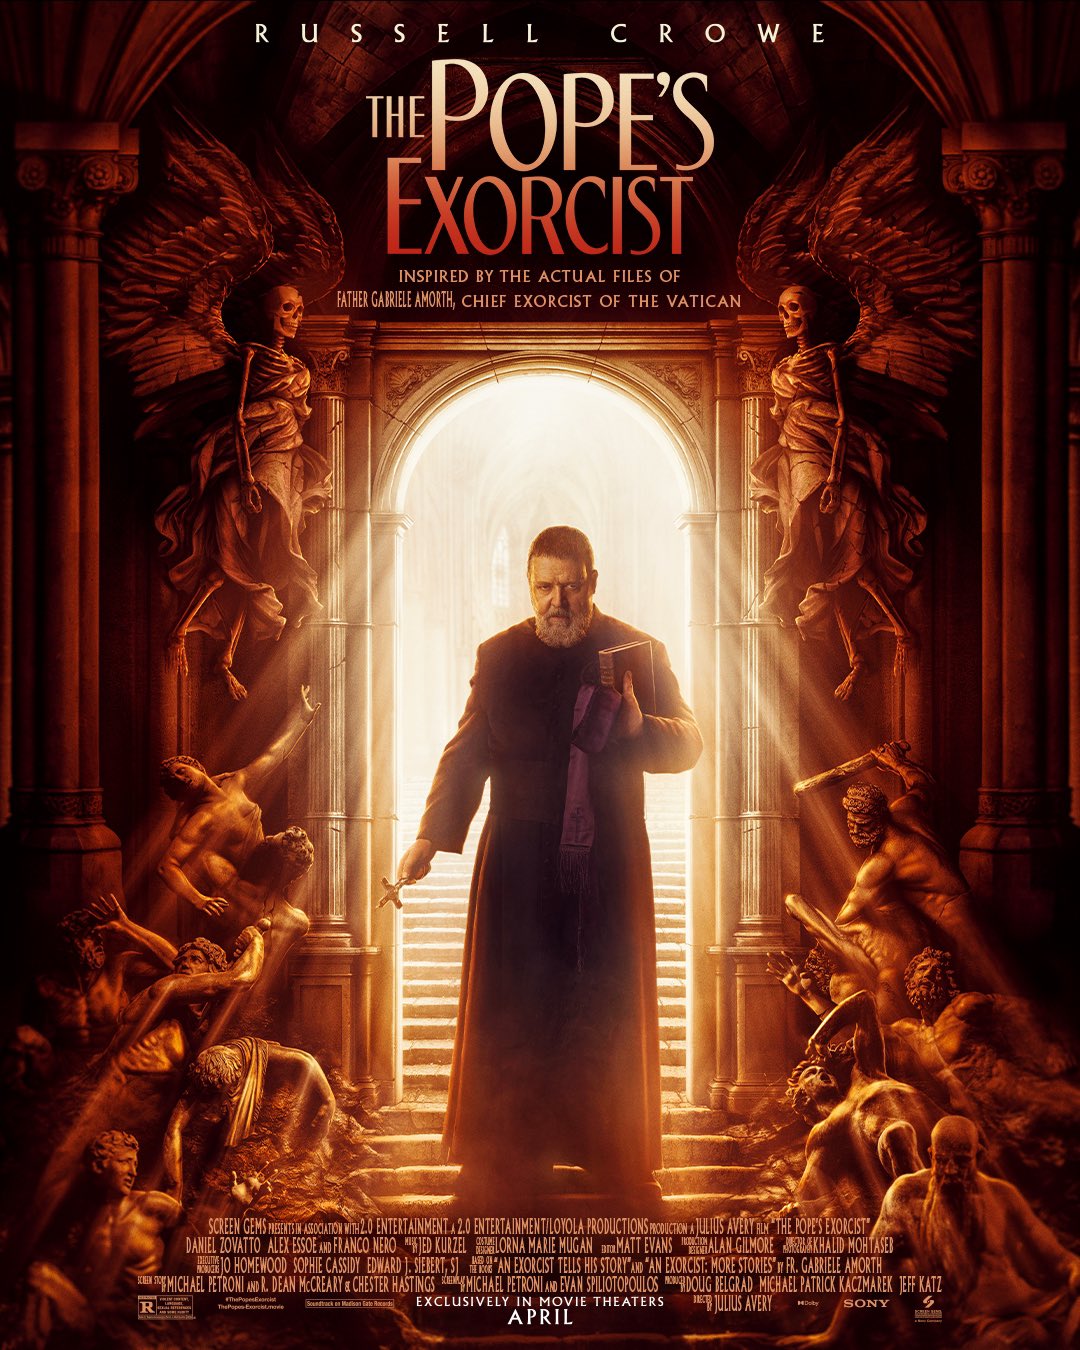 The Pope's Exorcist Film Analysis